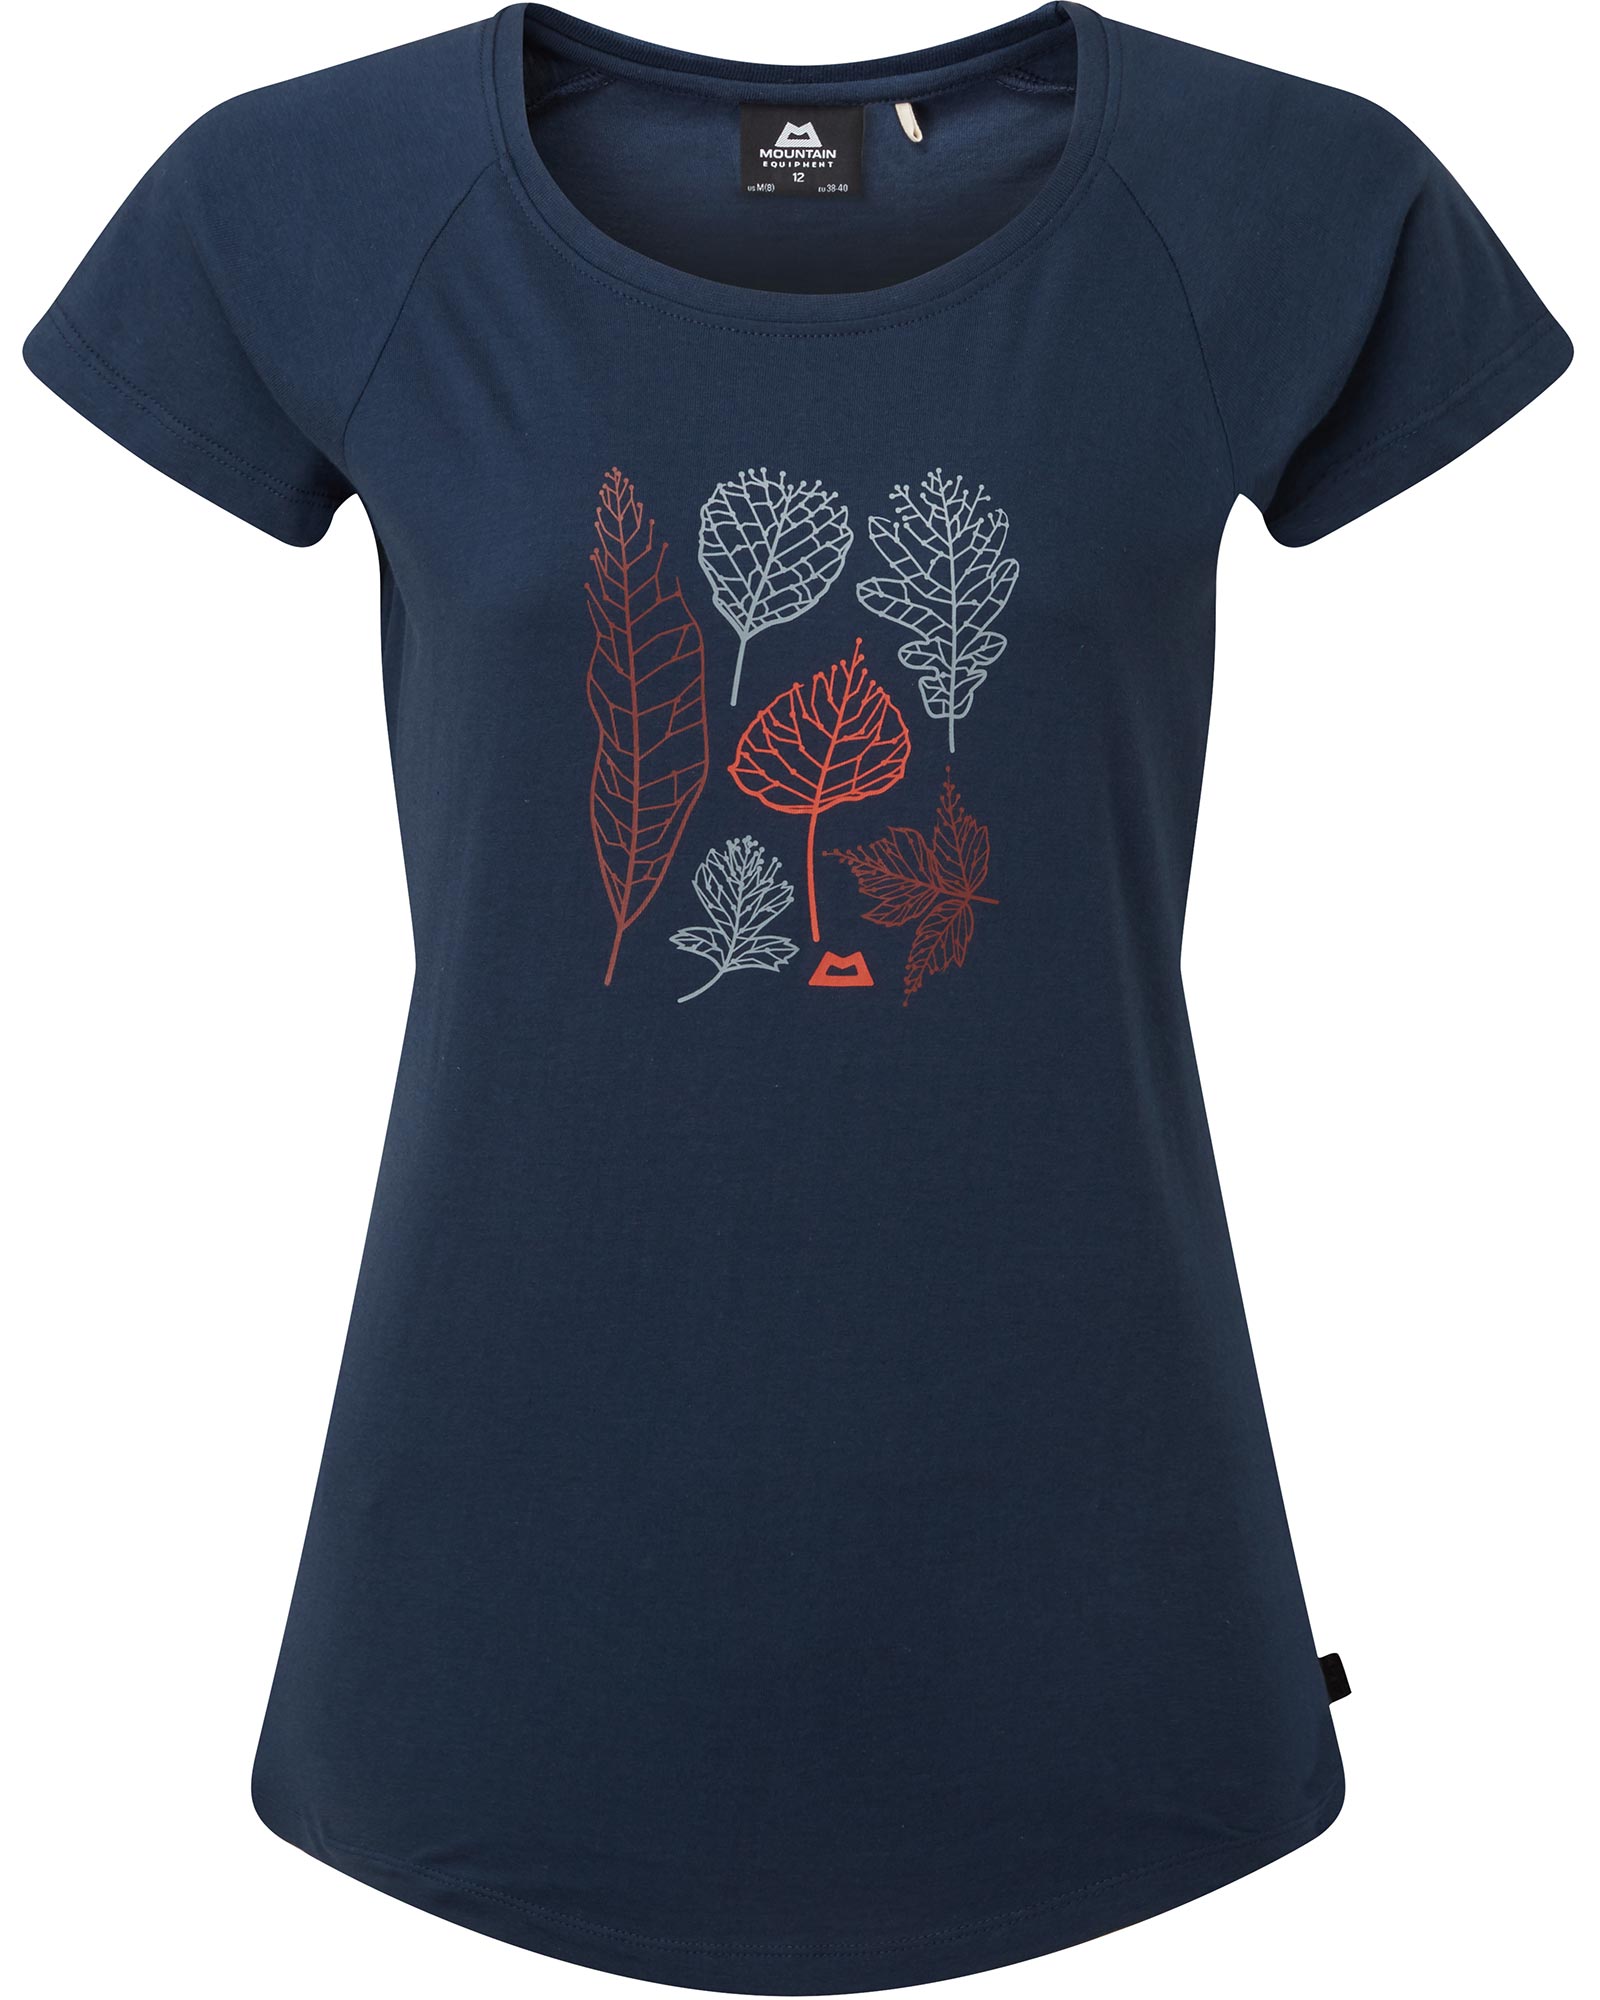 Product image of Mountain equipment Leaf Women's T-Shirt